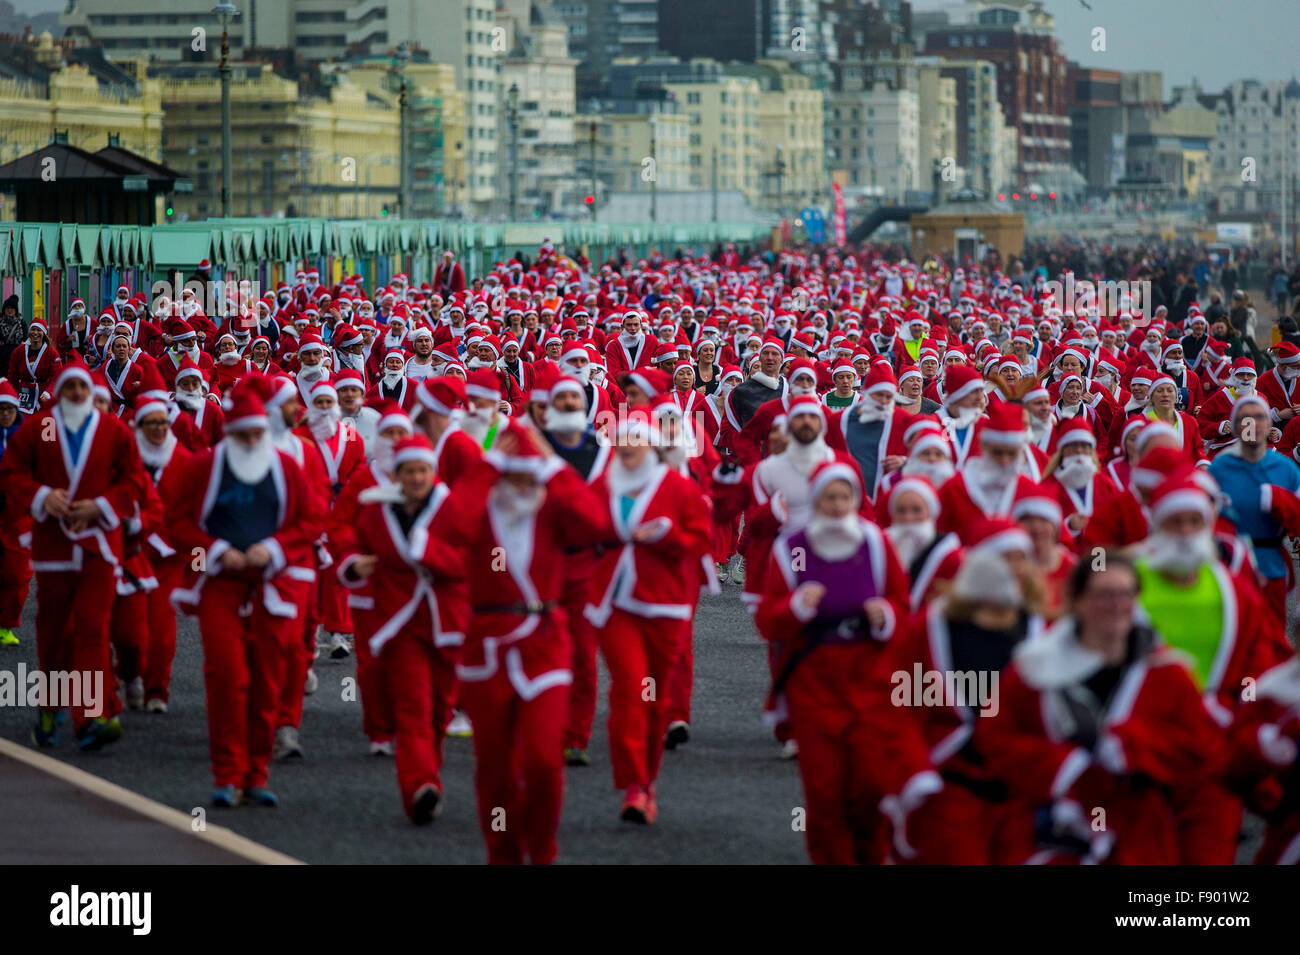 Sea of red santas running along Brighton & Hove seafront, Sussex, UK today at the annual ‘Santa Dash’.  Darren Cool - 0779230872 Stock Photo